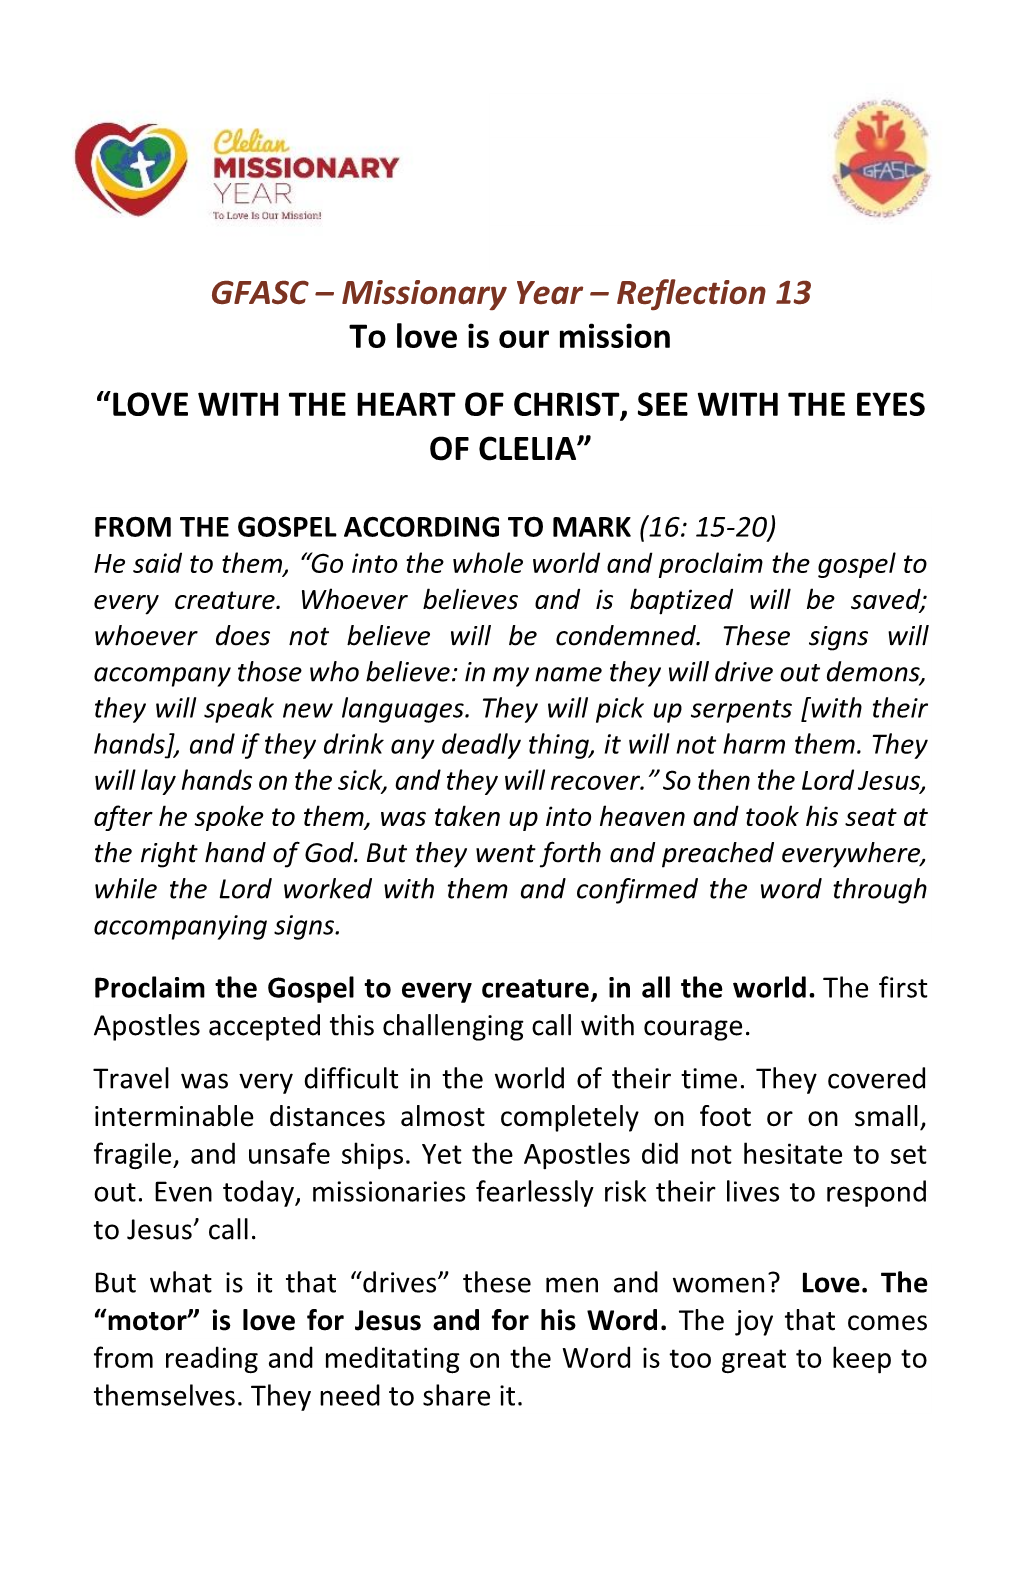 Love with the Heart of Christ, See with the Eyes of Clelia”